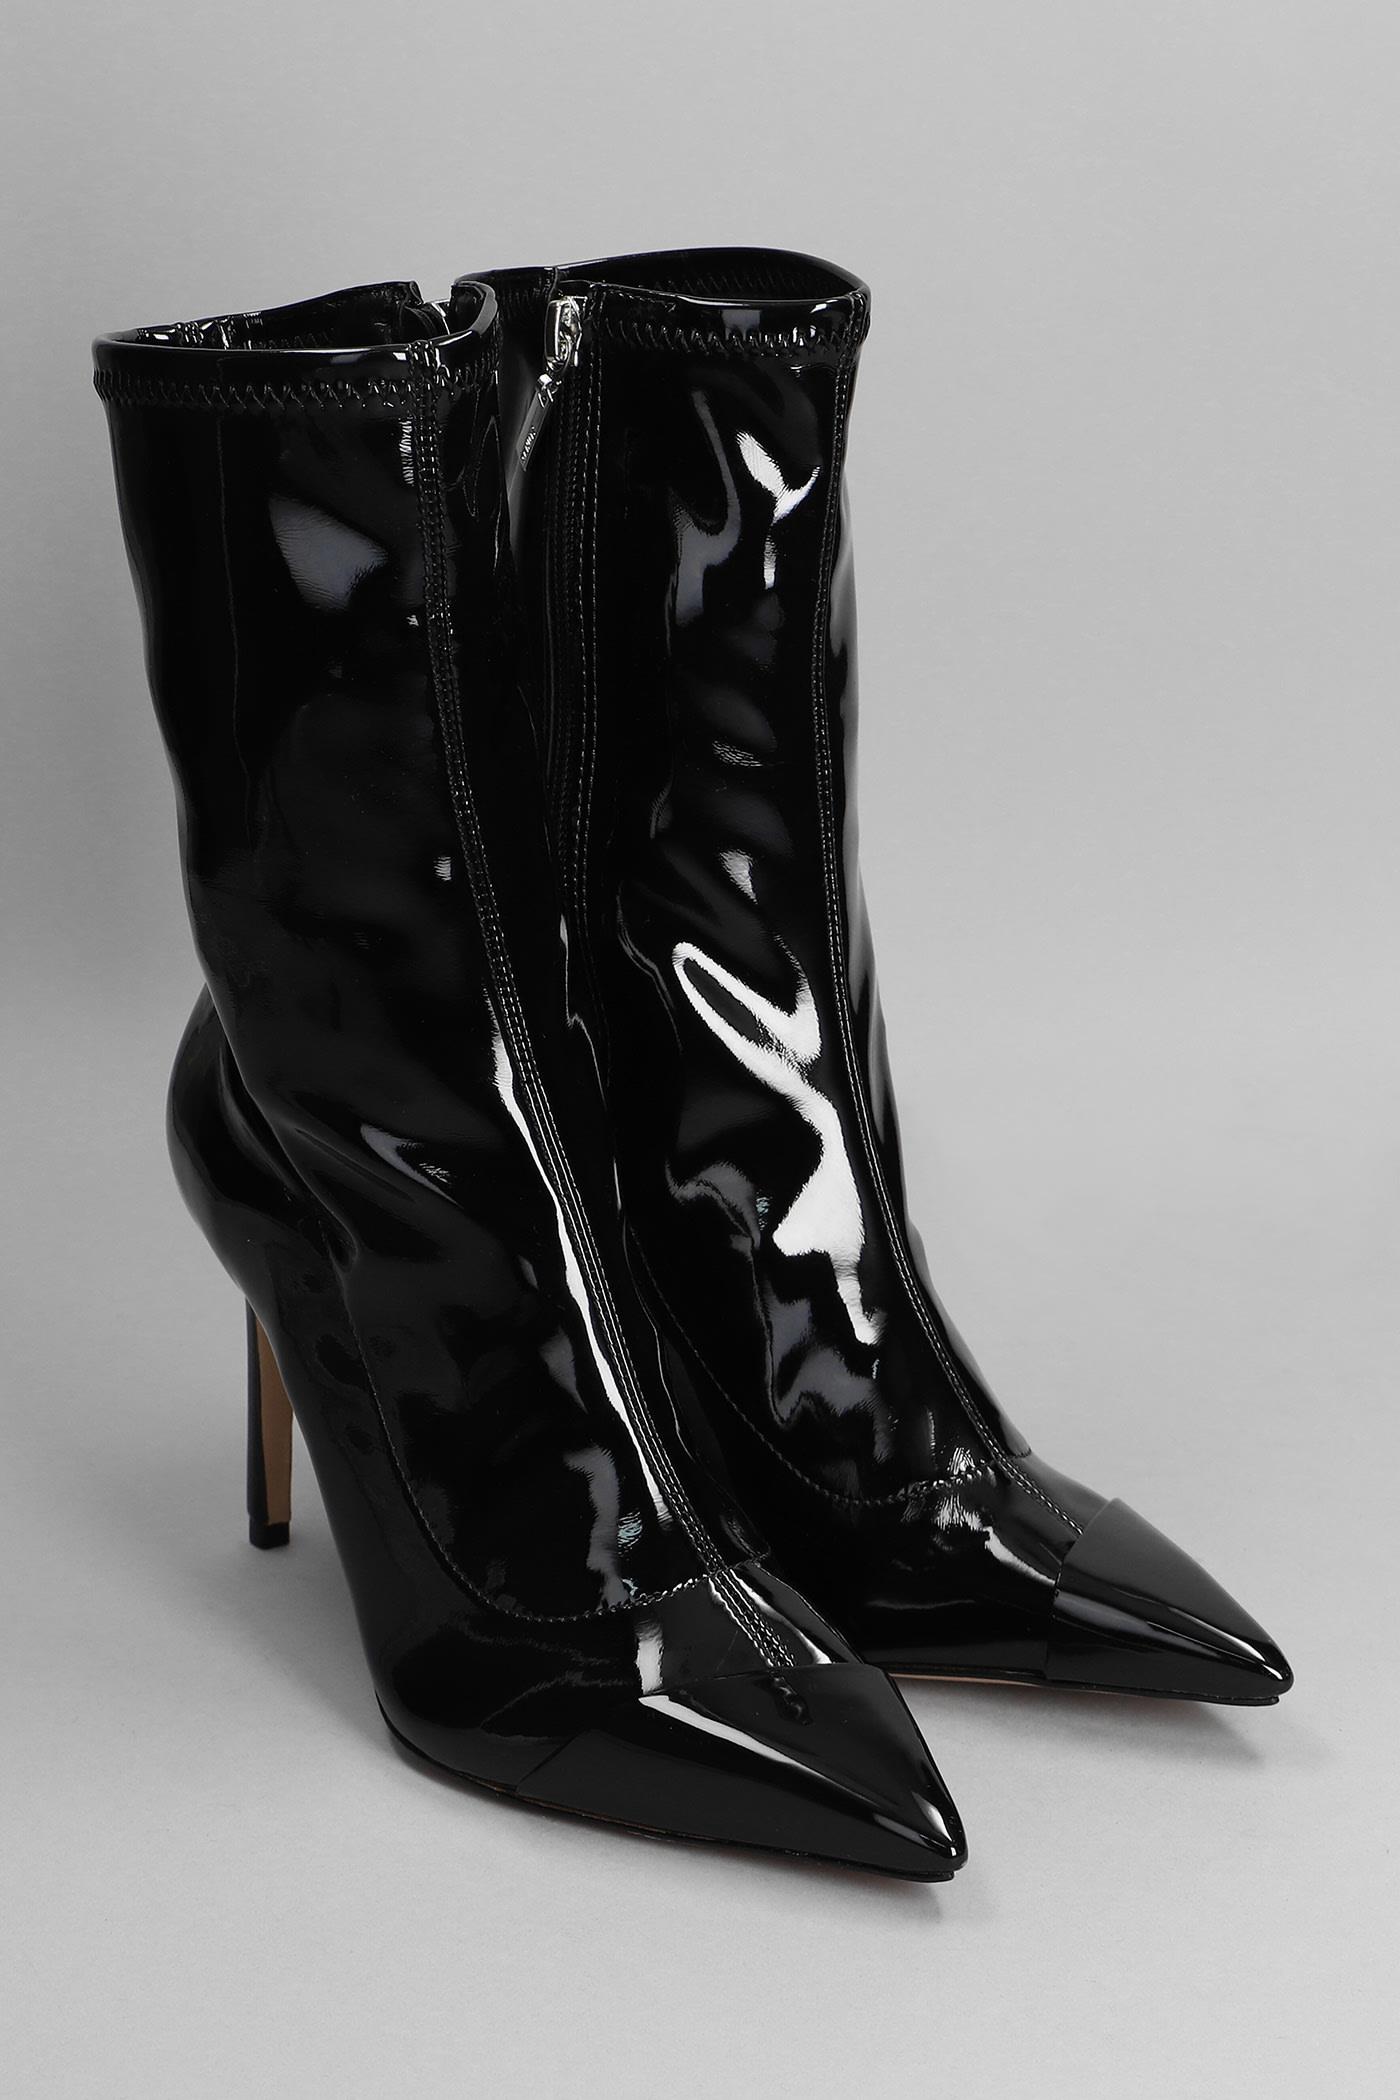 SCHUTZ SHOES Luh High Heels Ankle Boots In Black Patent Leather | Lyst